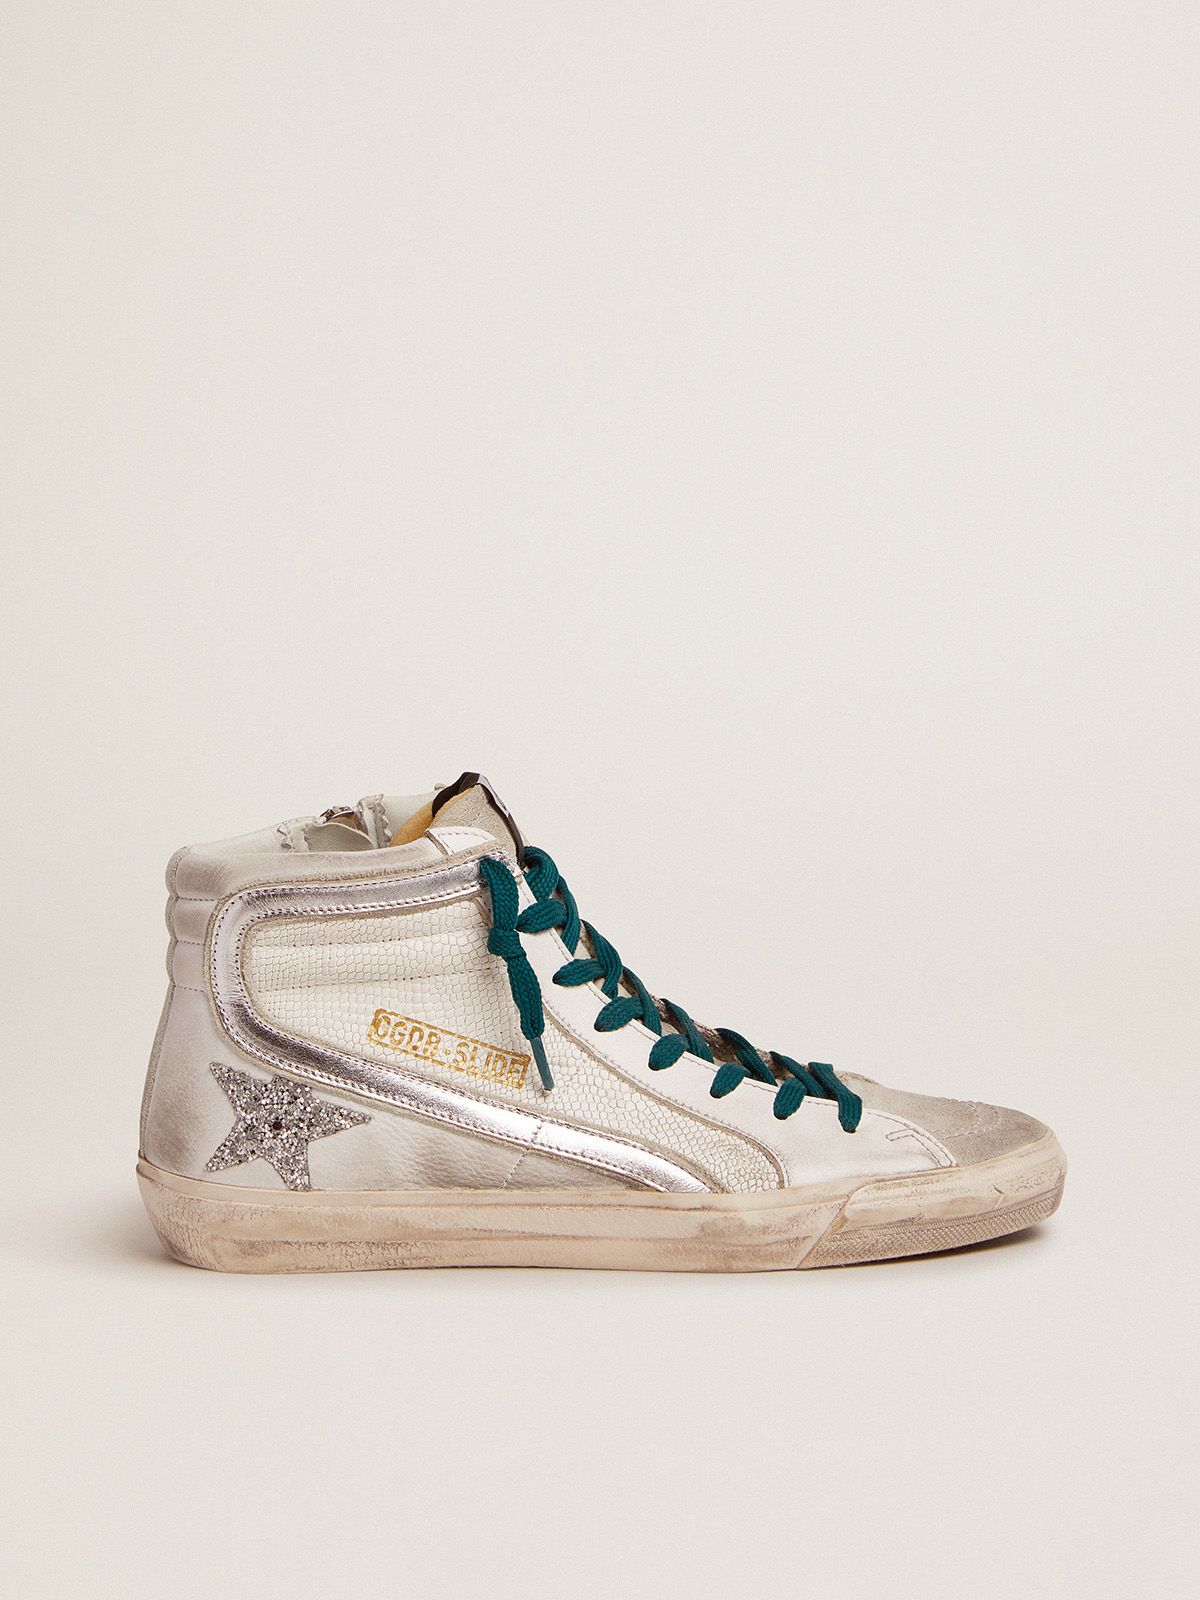 golden goose star with upper snake-print sneakers silver glitter Slide and leather